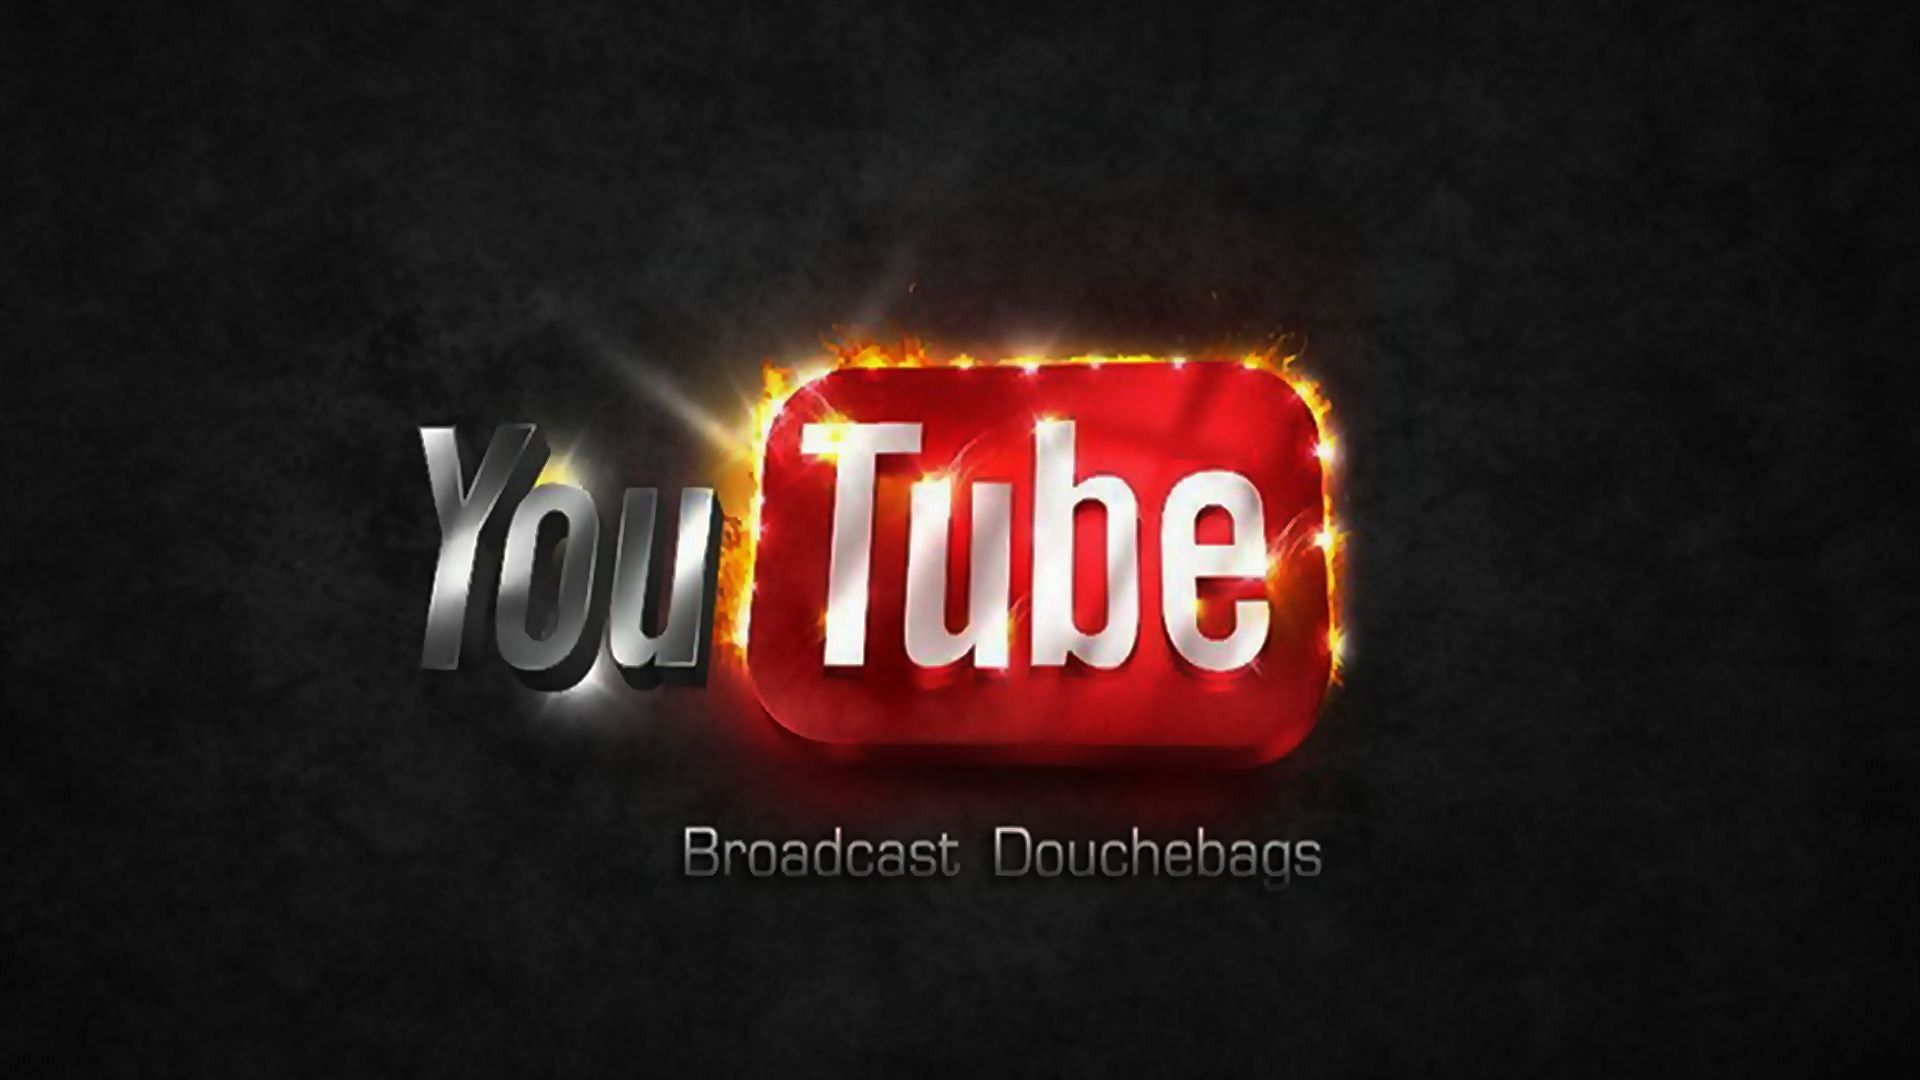 Wallpaper YouTube. YouTube Wallpaper, Awesome YouTube Background and Cute YouTube Background